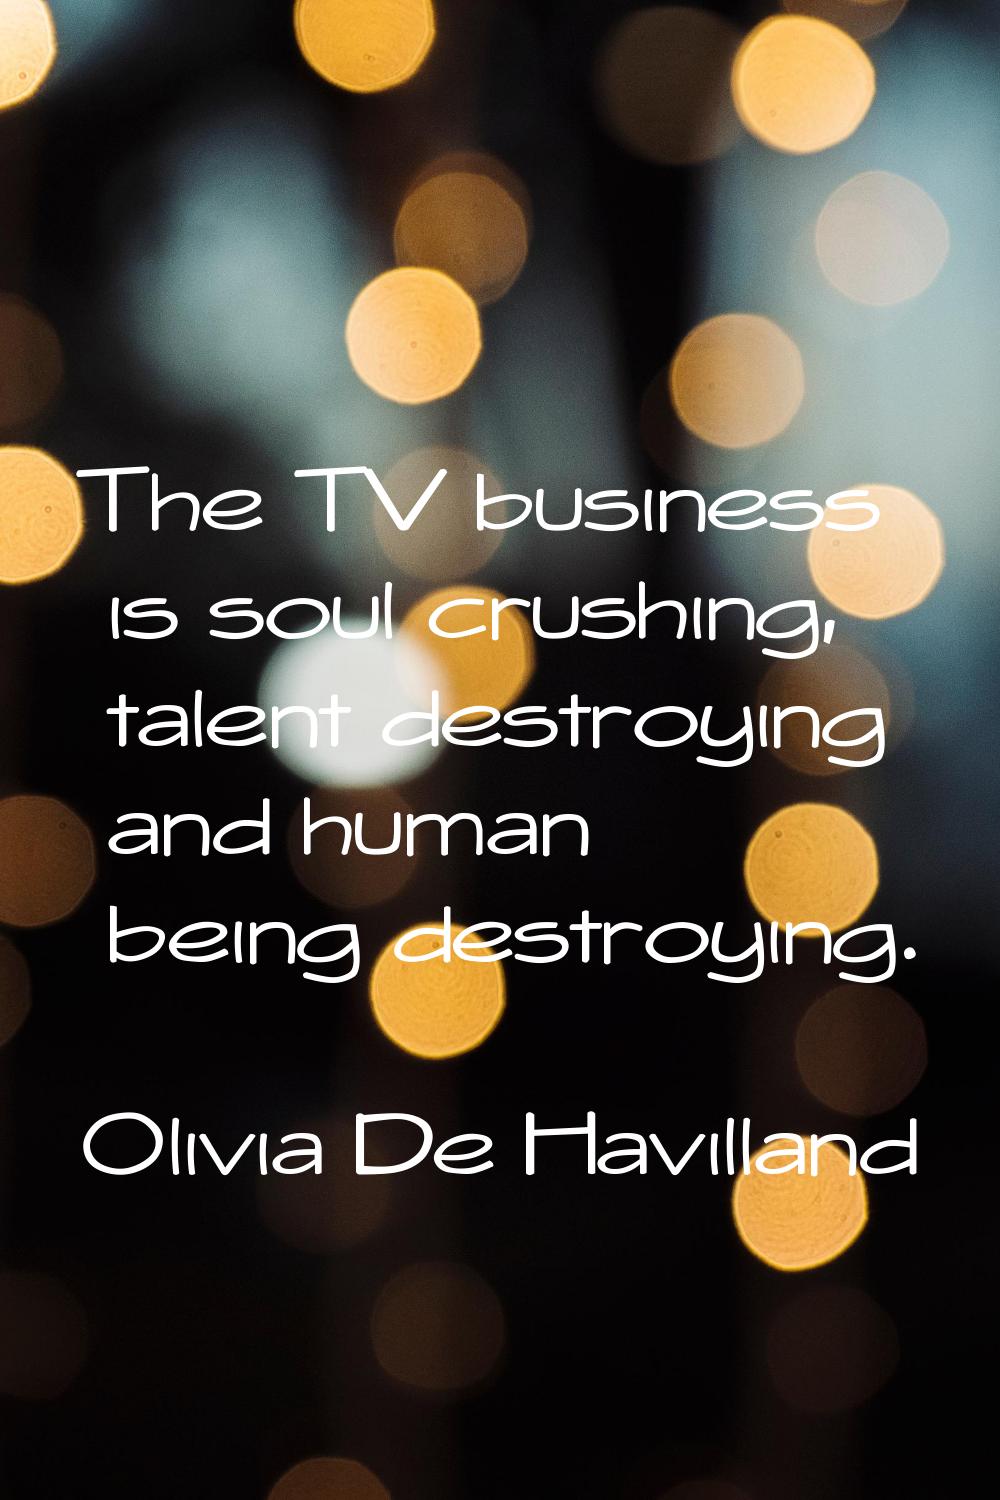 The TV business is soul crushing, talent destroying and human being destroying.